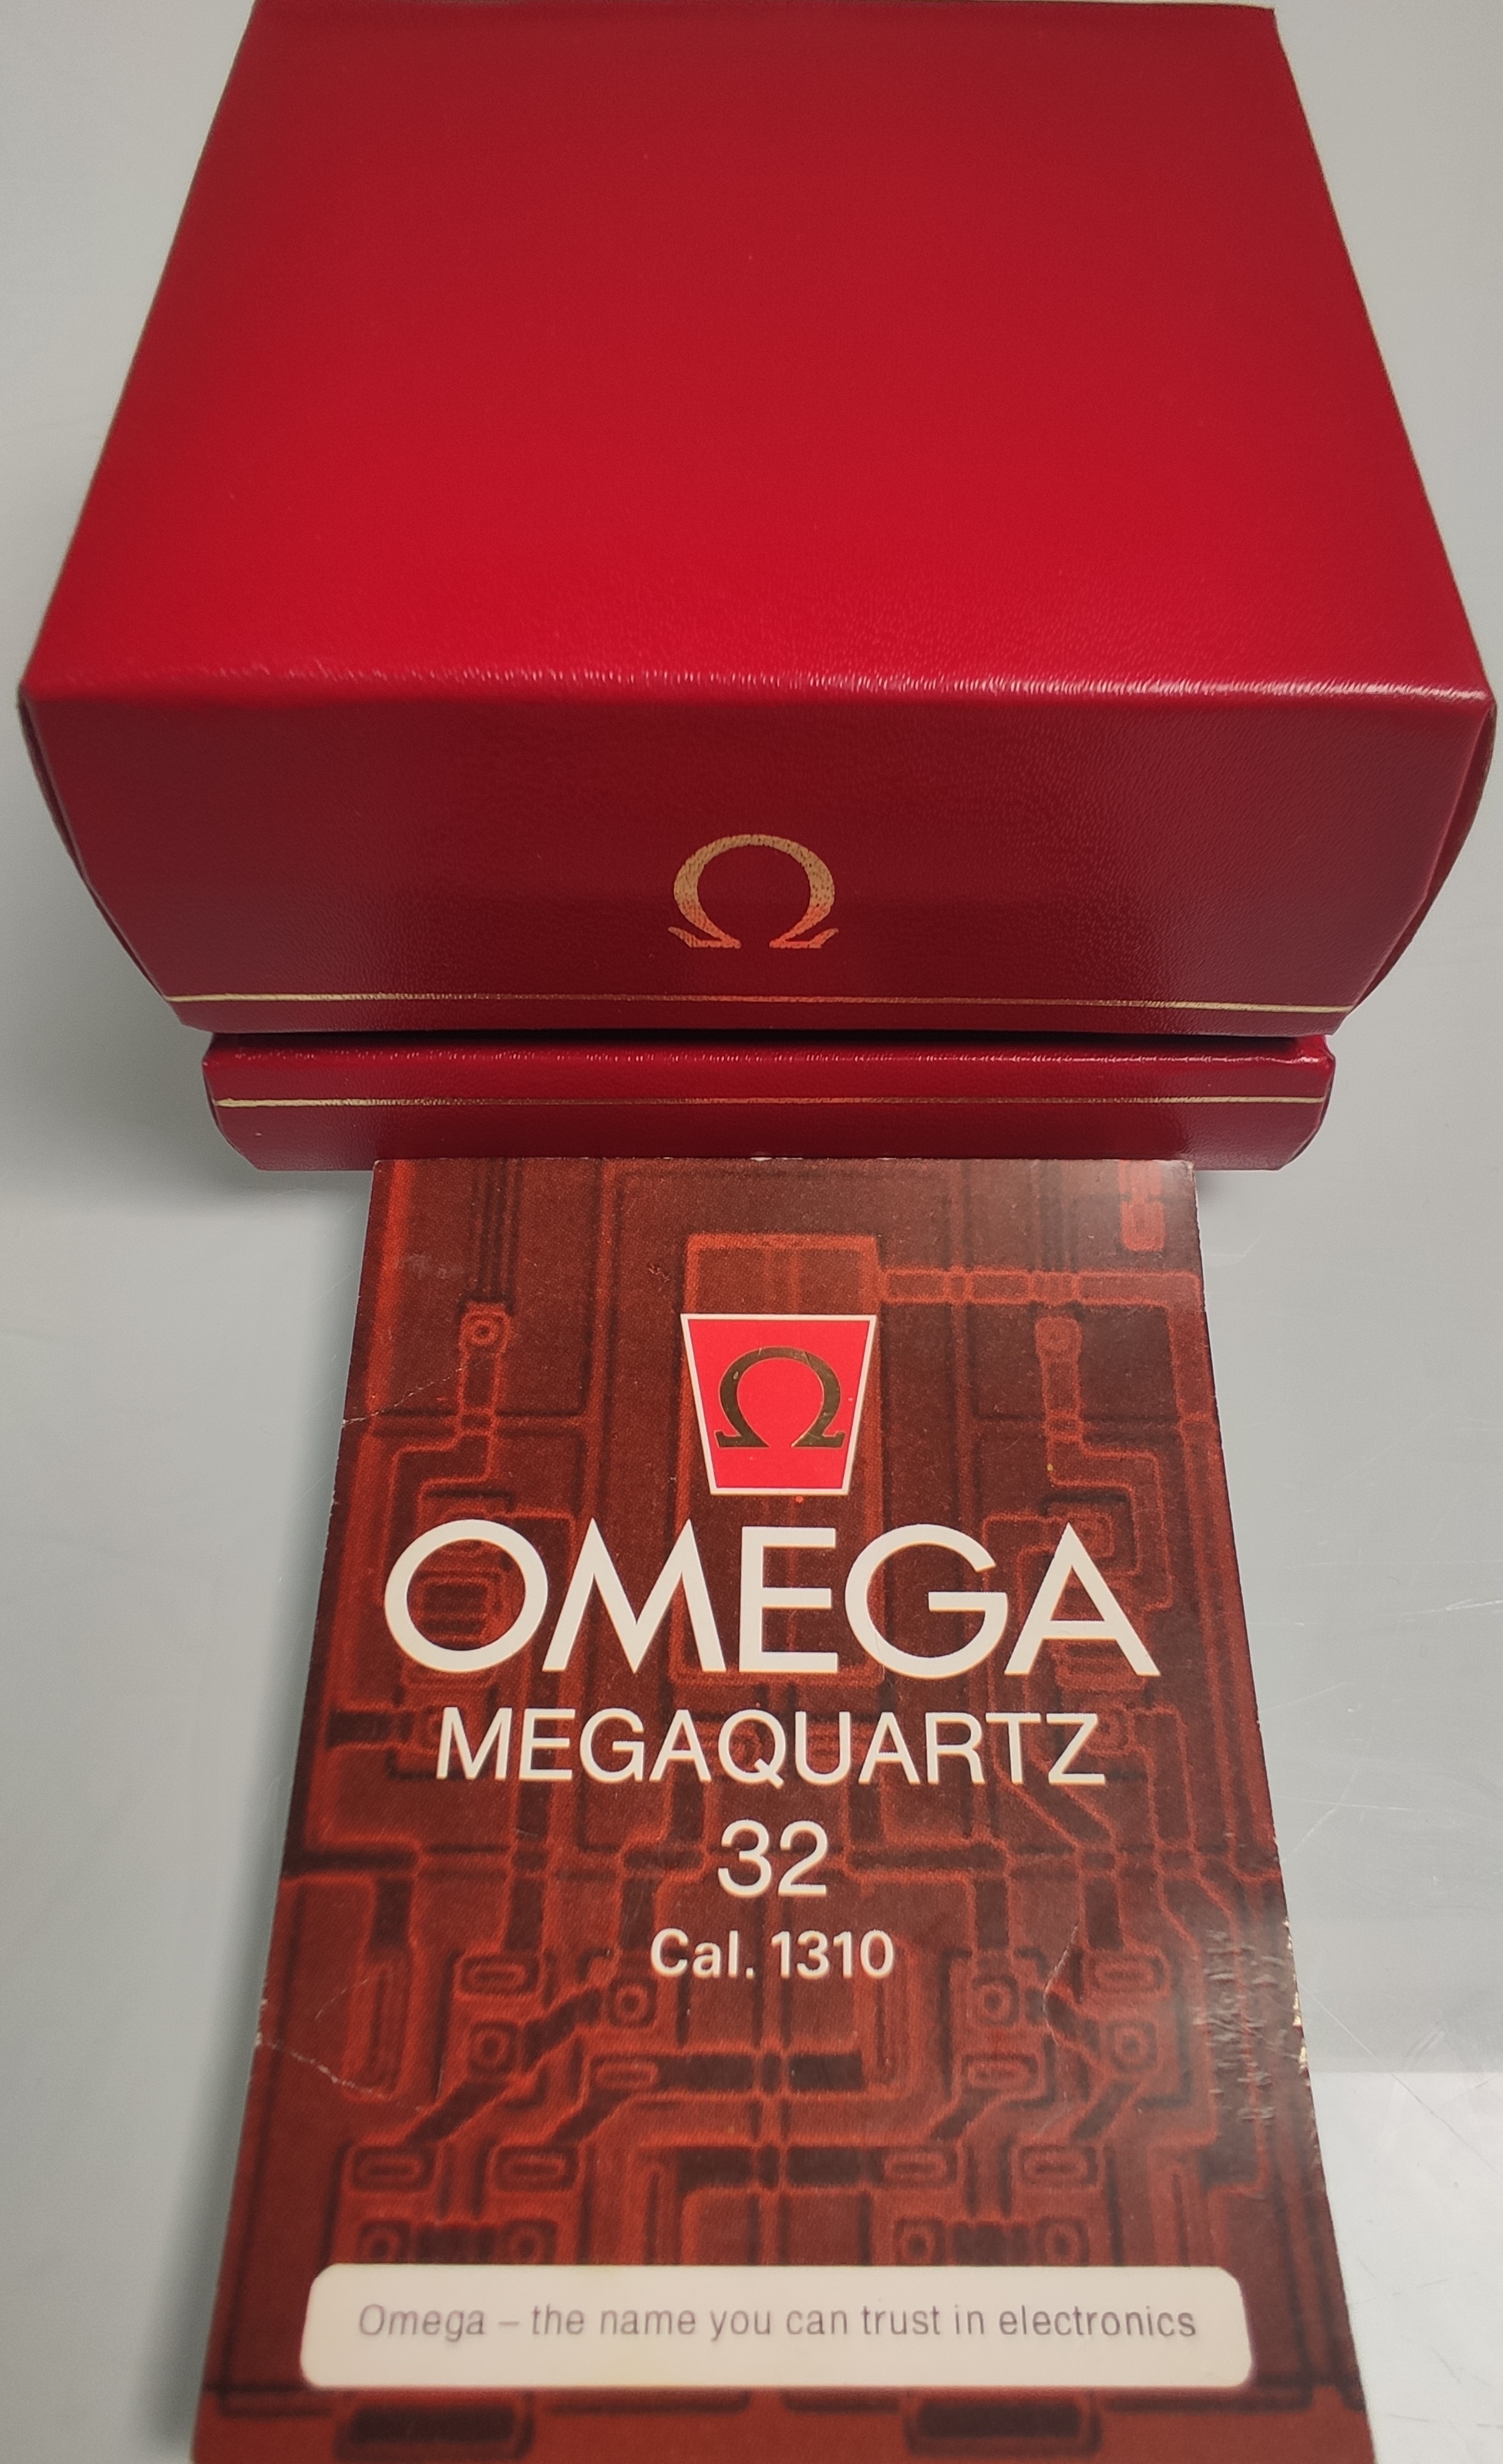 Omega Megaquartz 32 Gentlemans Watch Circa 1974 With Very Rare Gold plated Omega Strap. - Image 2 of 8